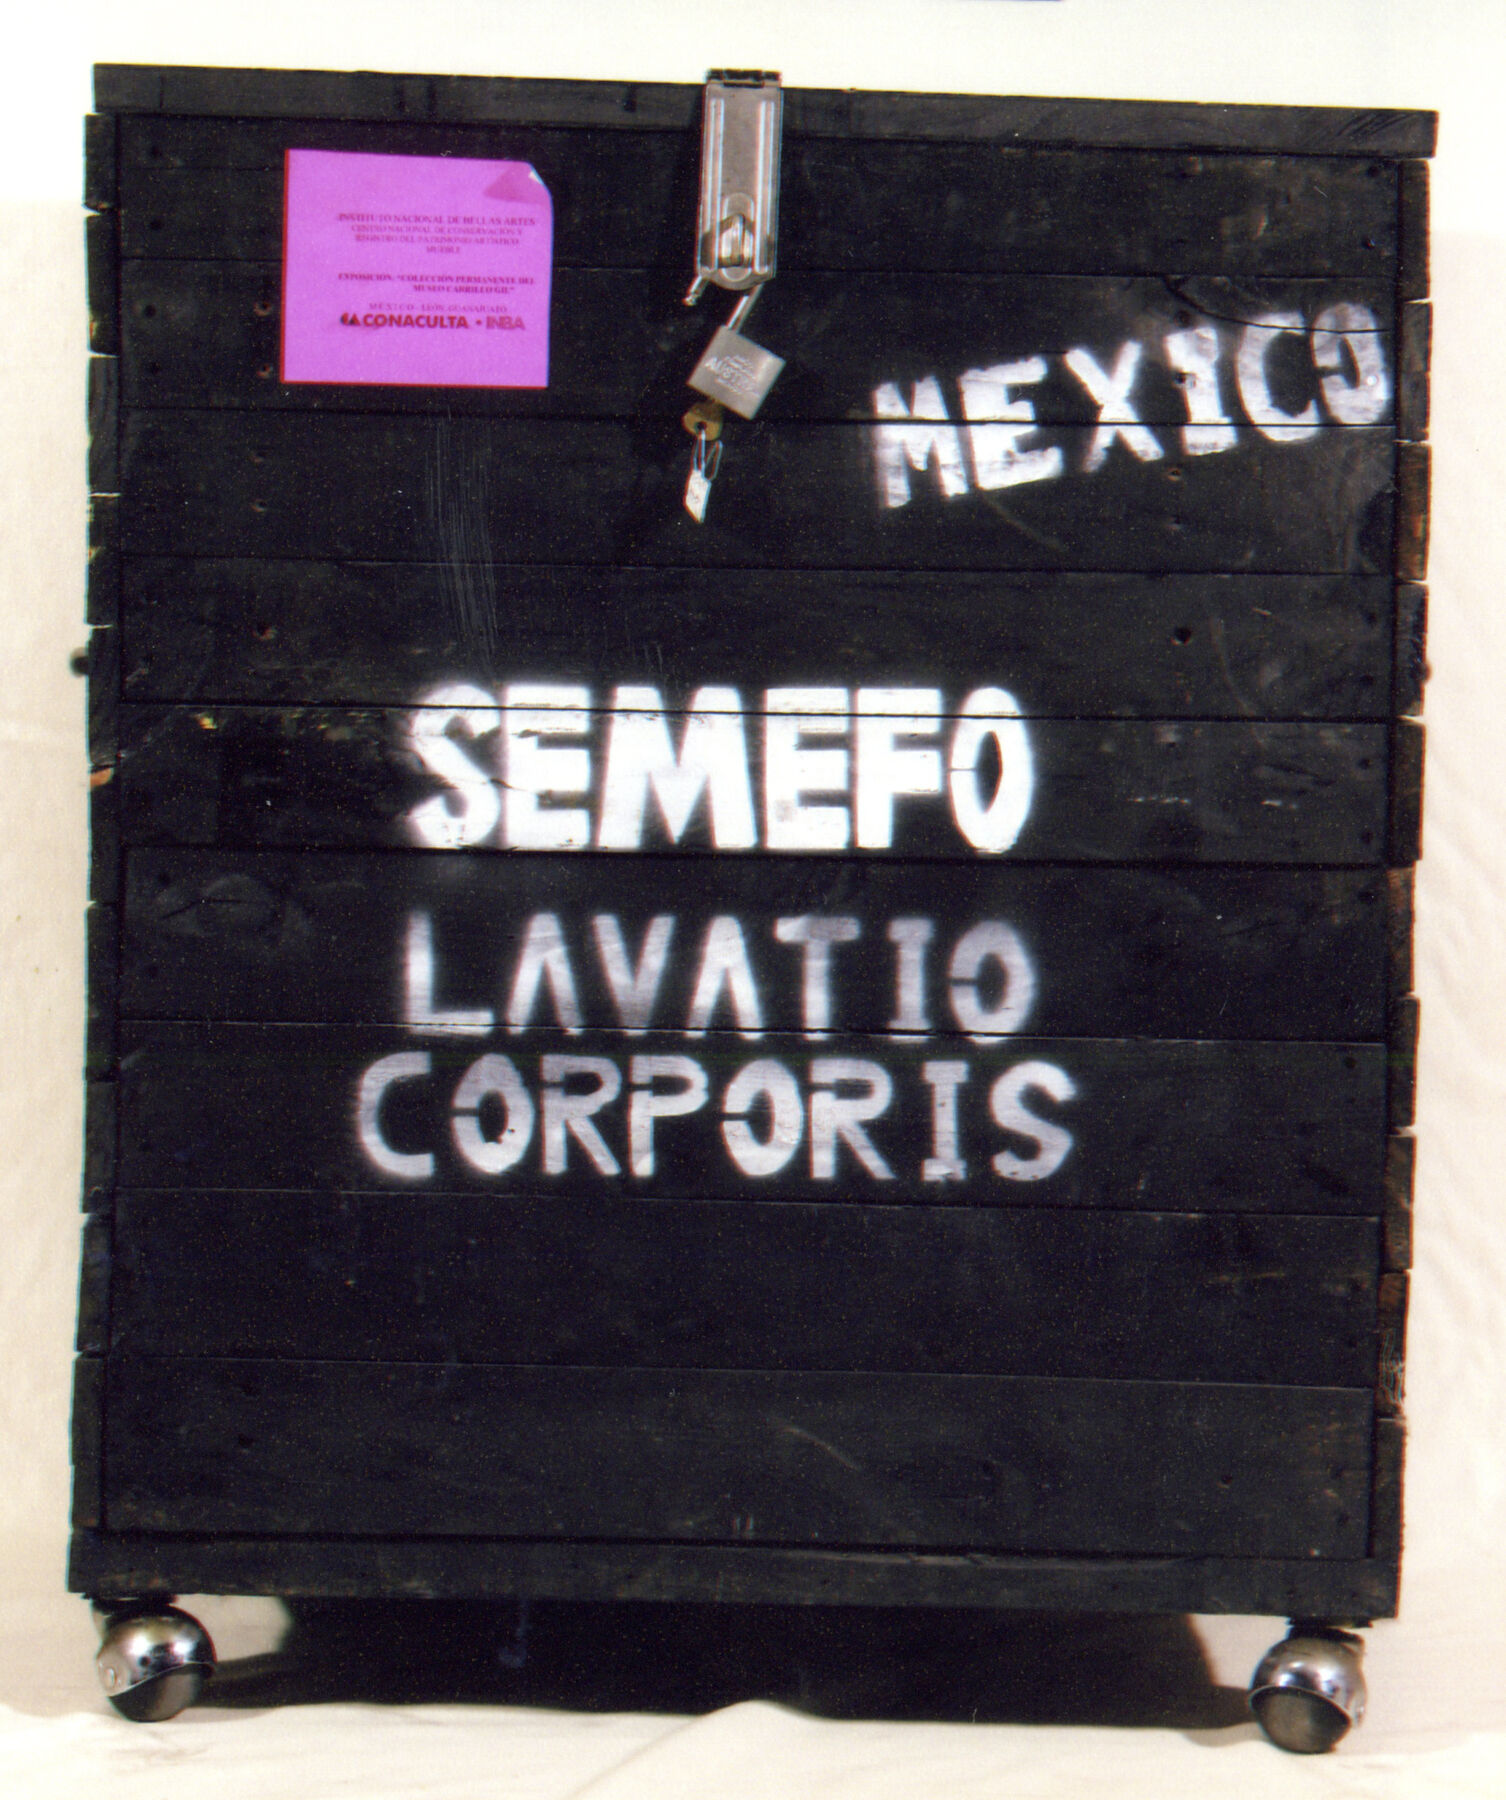 A black box with bright magenta sticker on the left and white bold lettering that says Mexico in the right corner and Semefo, Lavatio Corporis in the middle